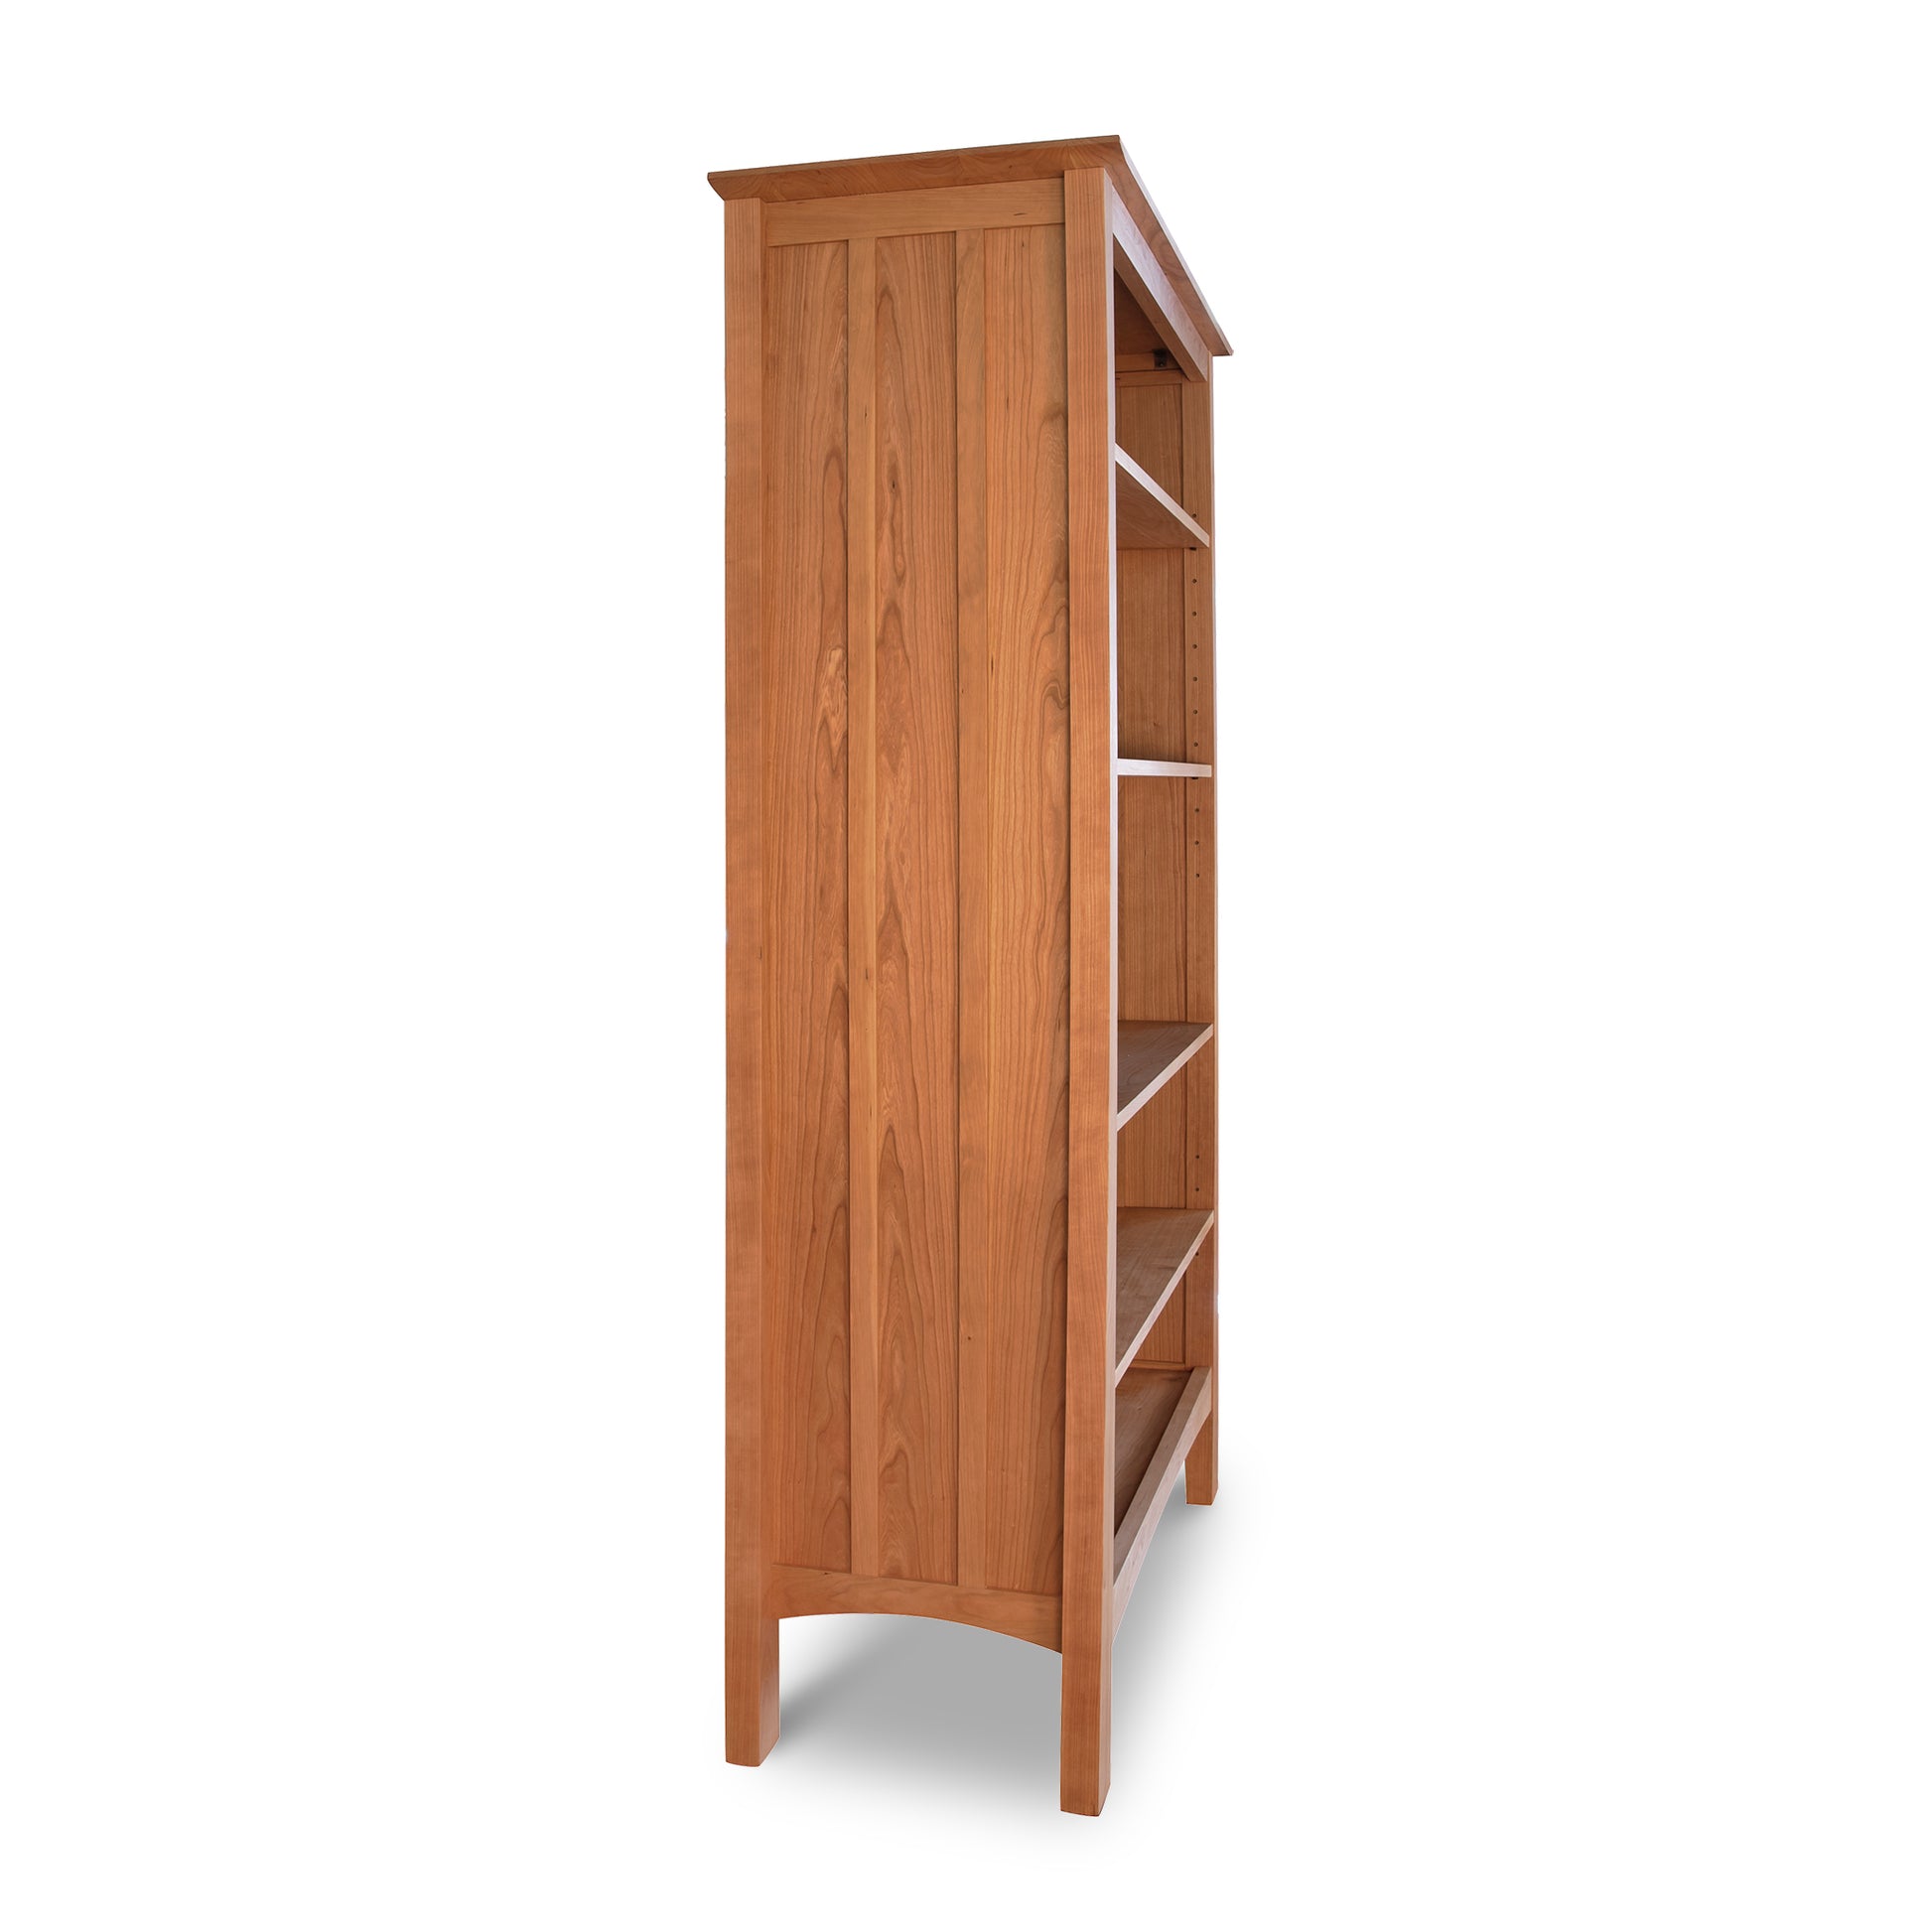 Wooden bookshelf with a closed cabinet on the left and open shelves on the right, isolated on a white background. This Vermont Furniture Designs Contemporary Craftsman Custom Bookcase is handmade, ensuring quality and uniqueness.